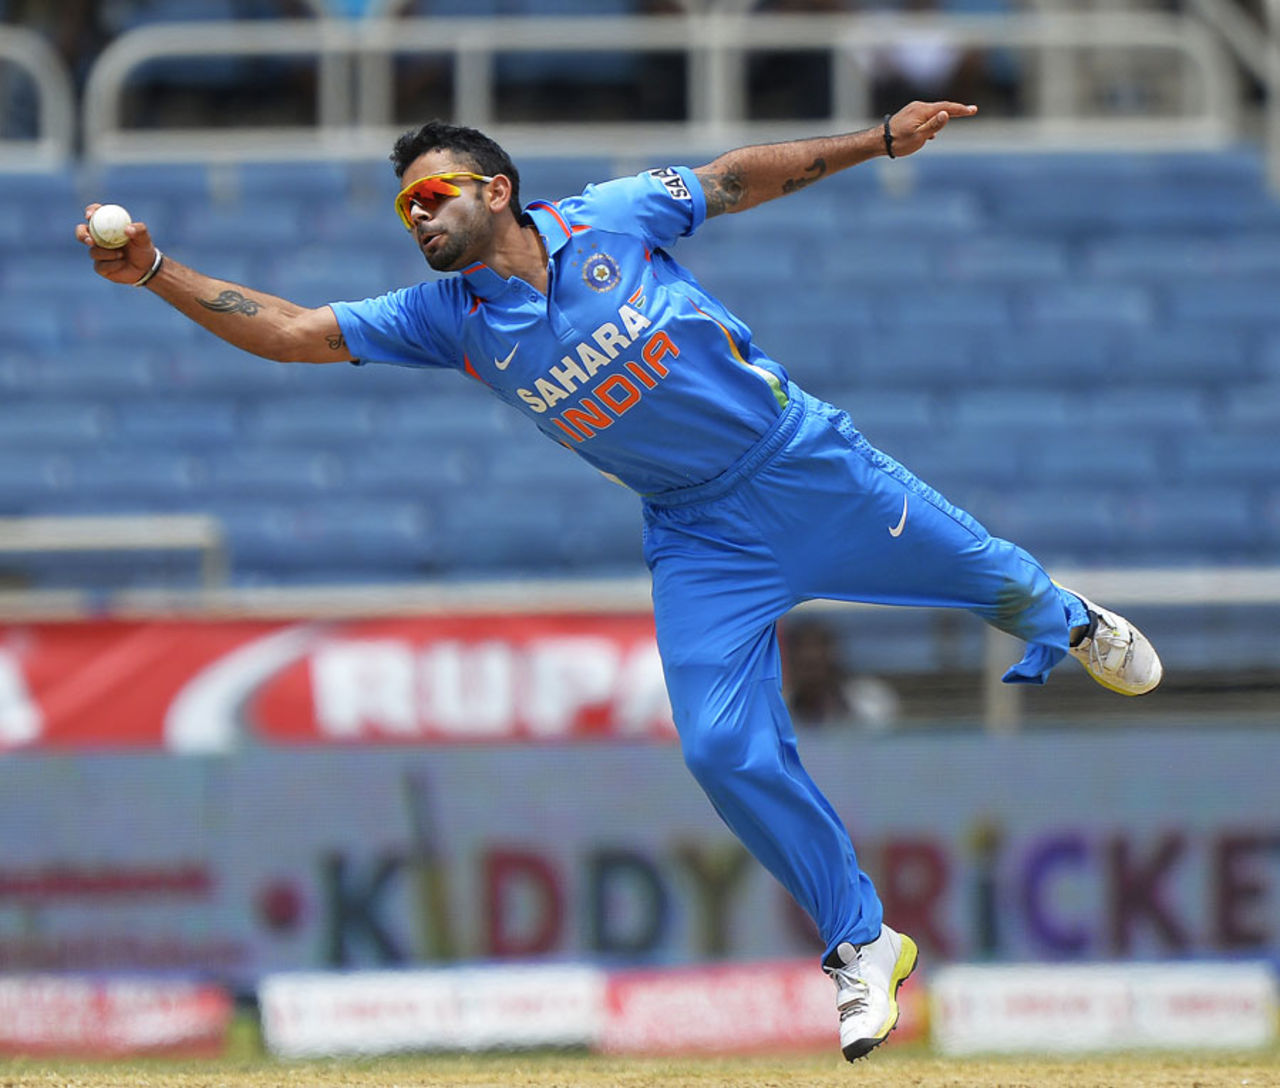 Kohli stretches to stop the ball off his own bowling, India v Sri Lanka, West Indies tri-series, Kingston, July 2, 2013